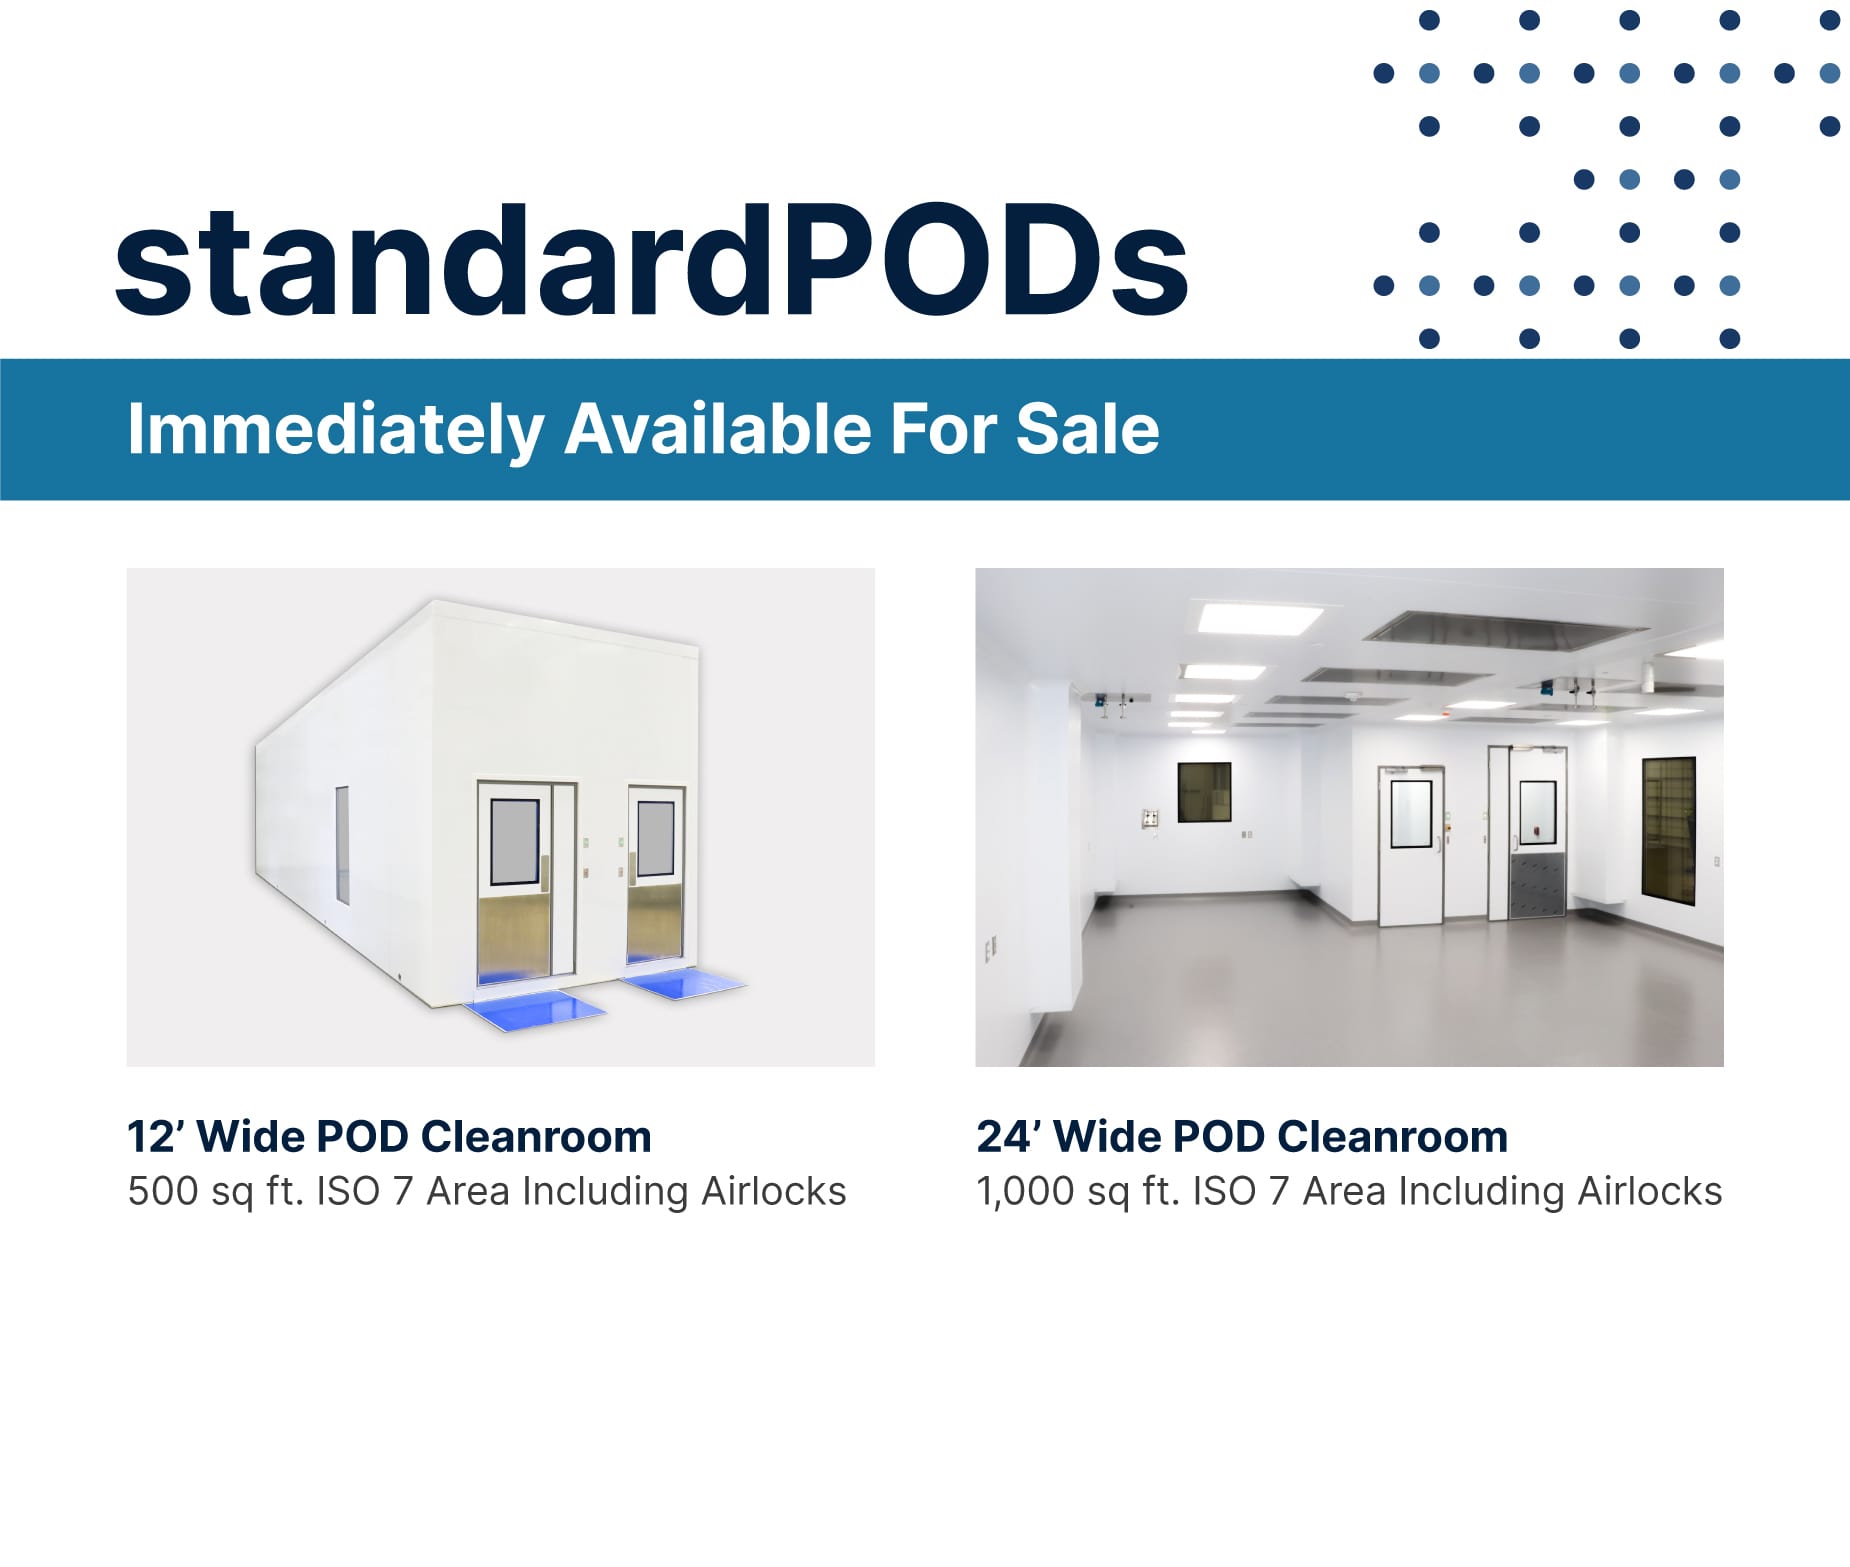 standard pods immediately available for sale click link to inquire.